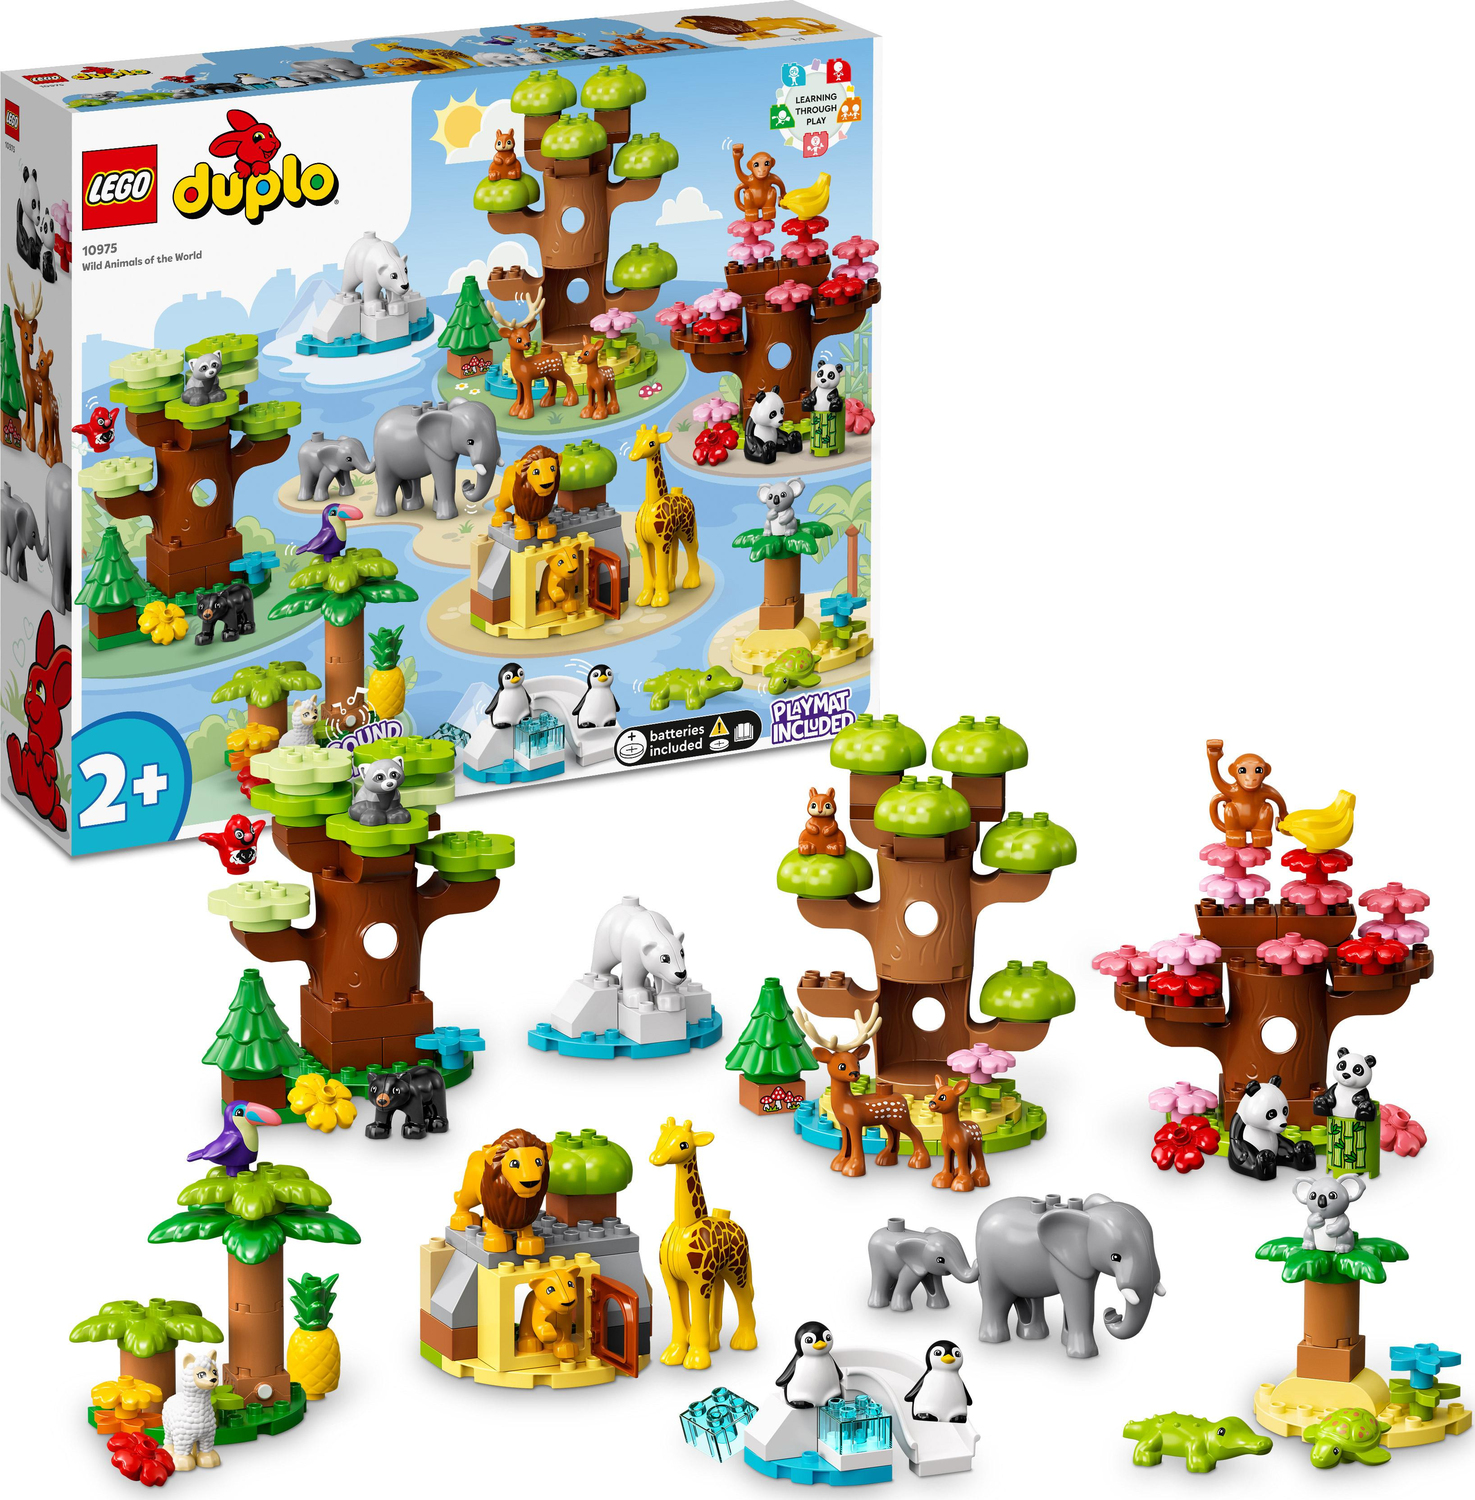 Patent Etna Ugyldigt LEGO DUPLO Wild Animals of the World Toy Set – Awesome Toys Gifts